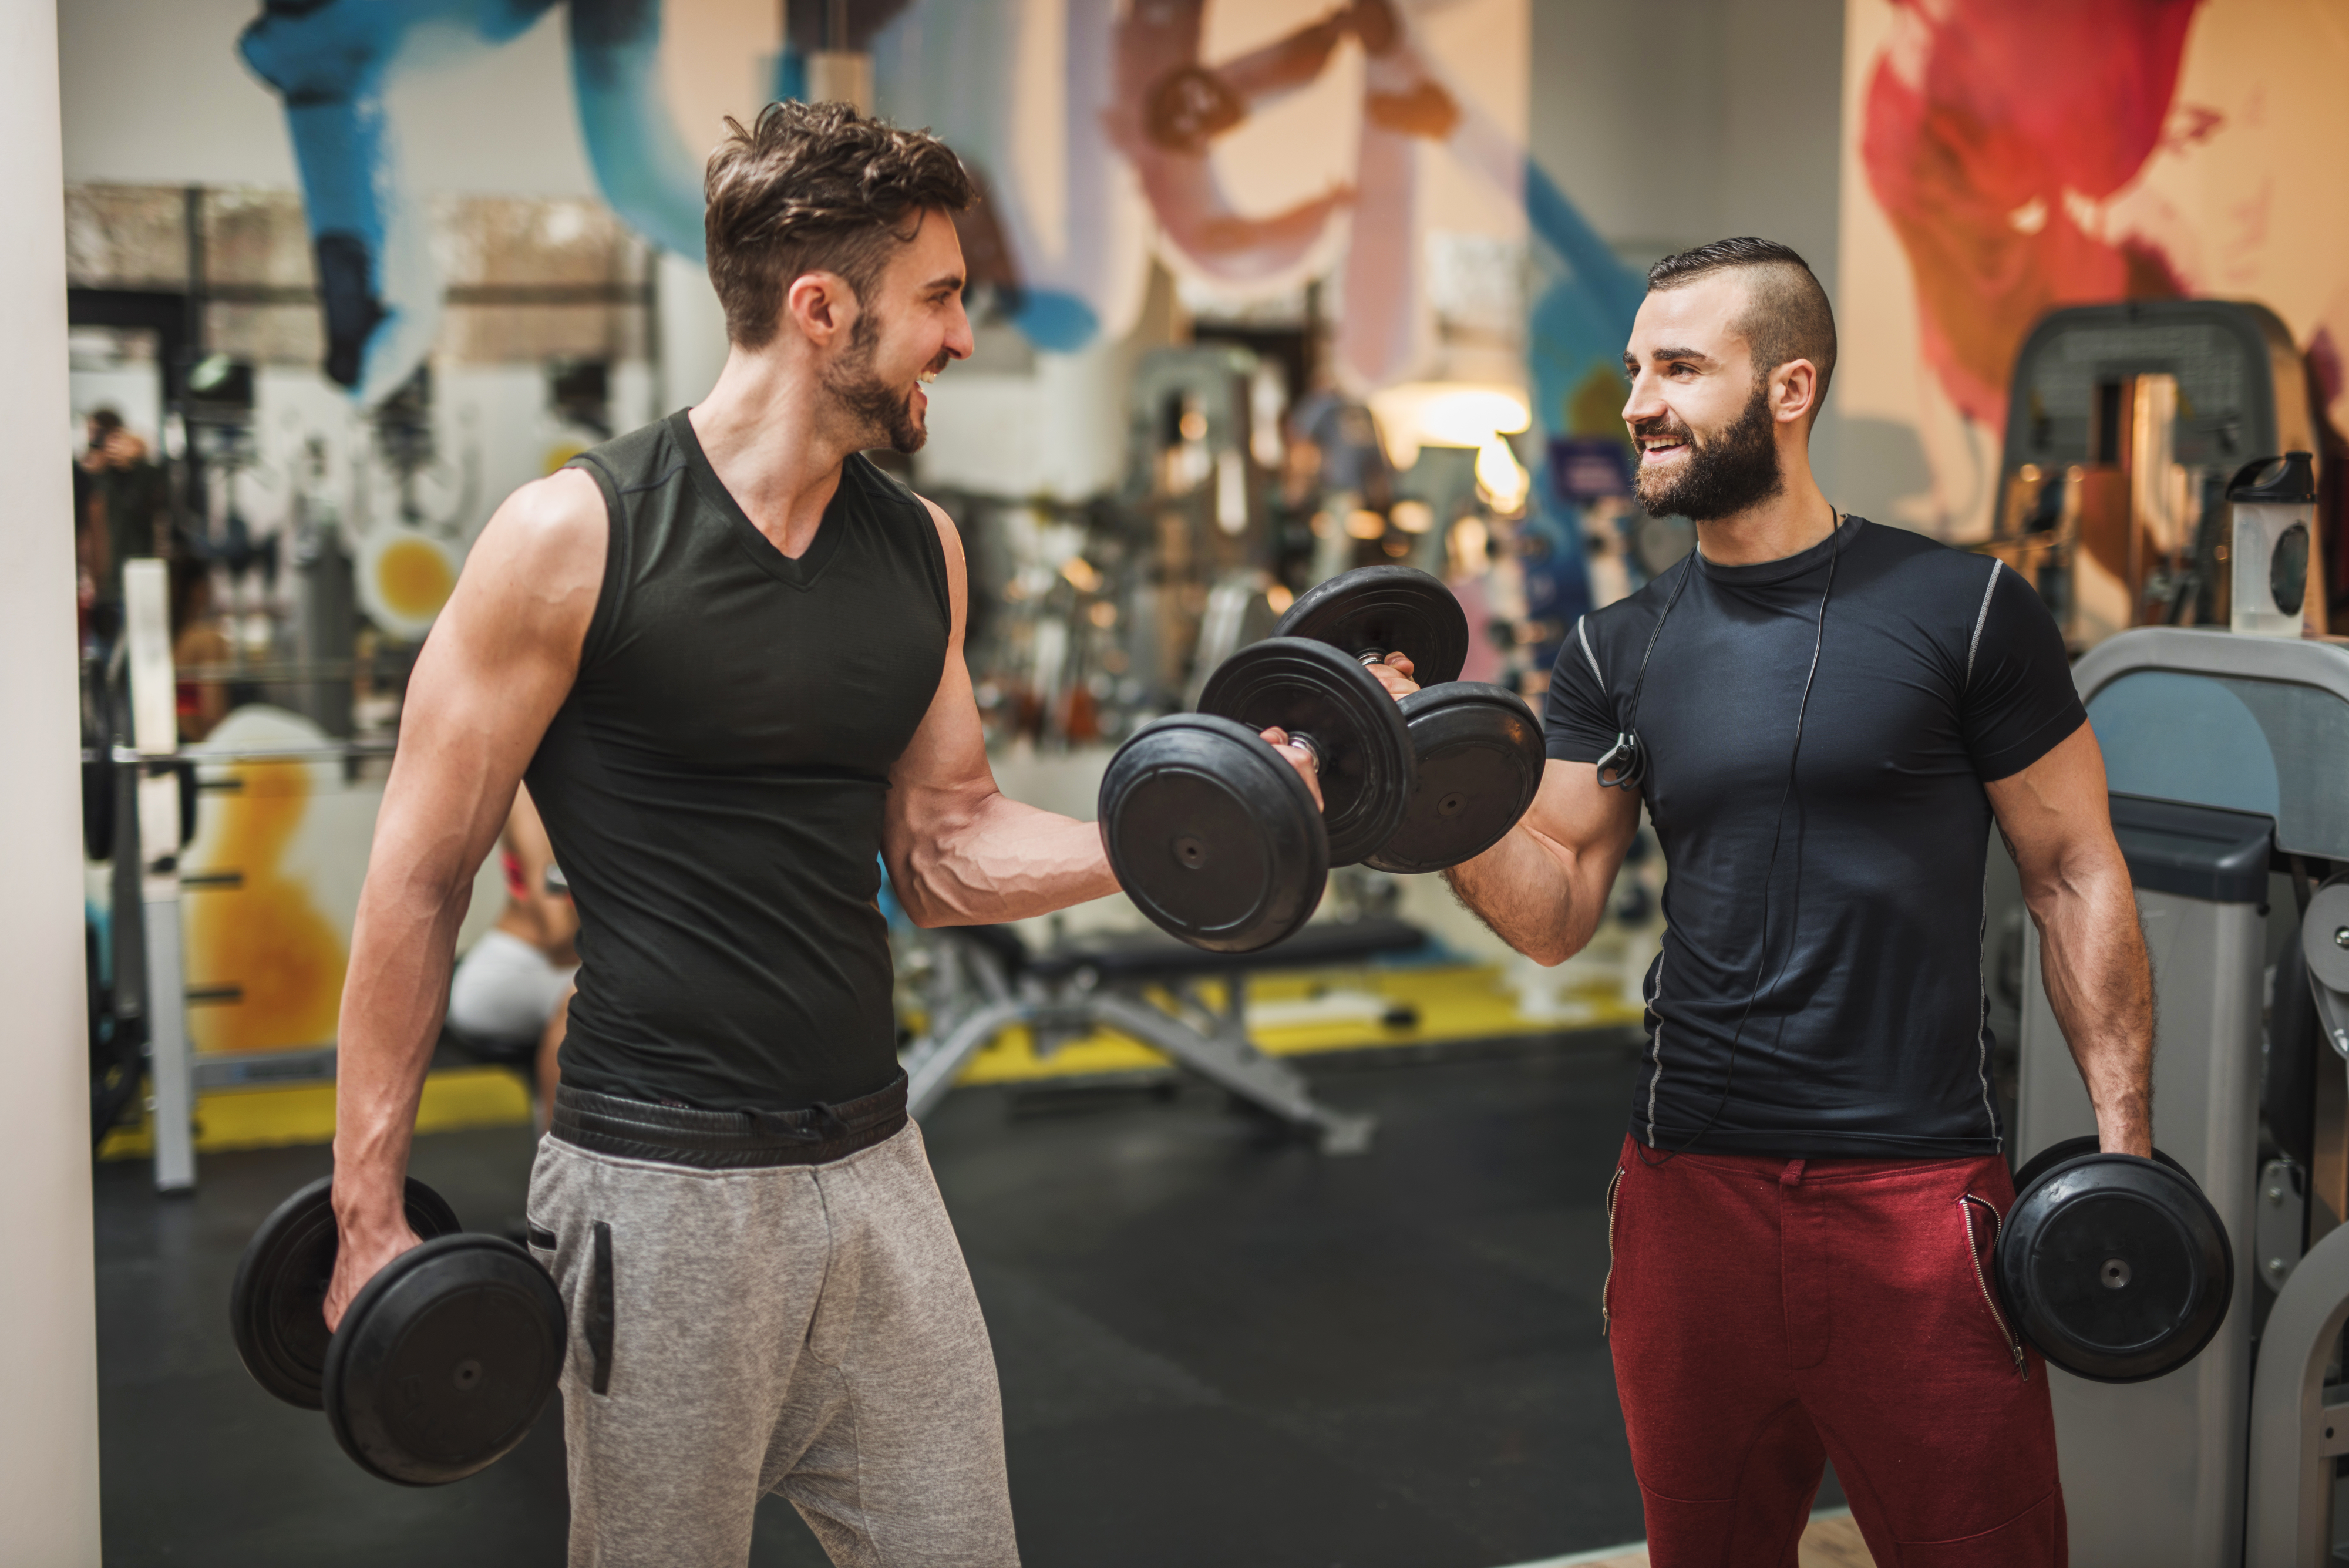 Two men smiling while lifting dumbbells at a gym